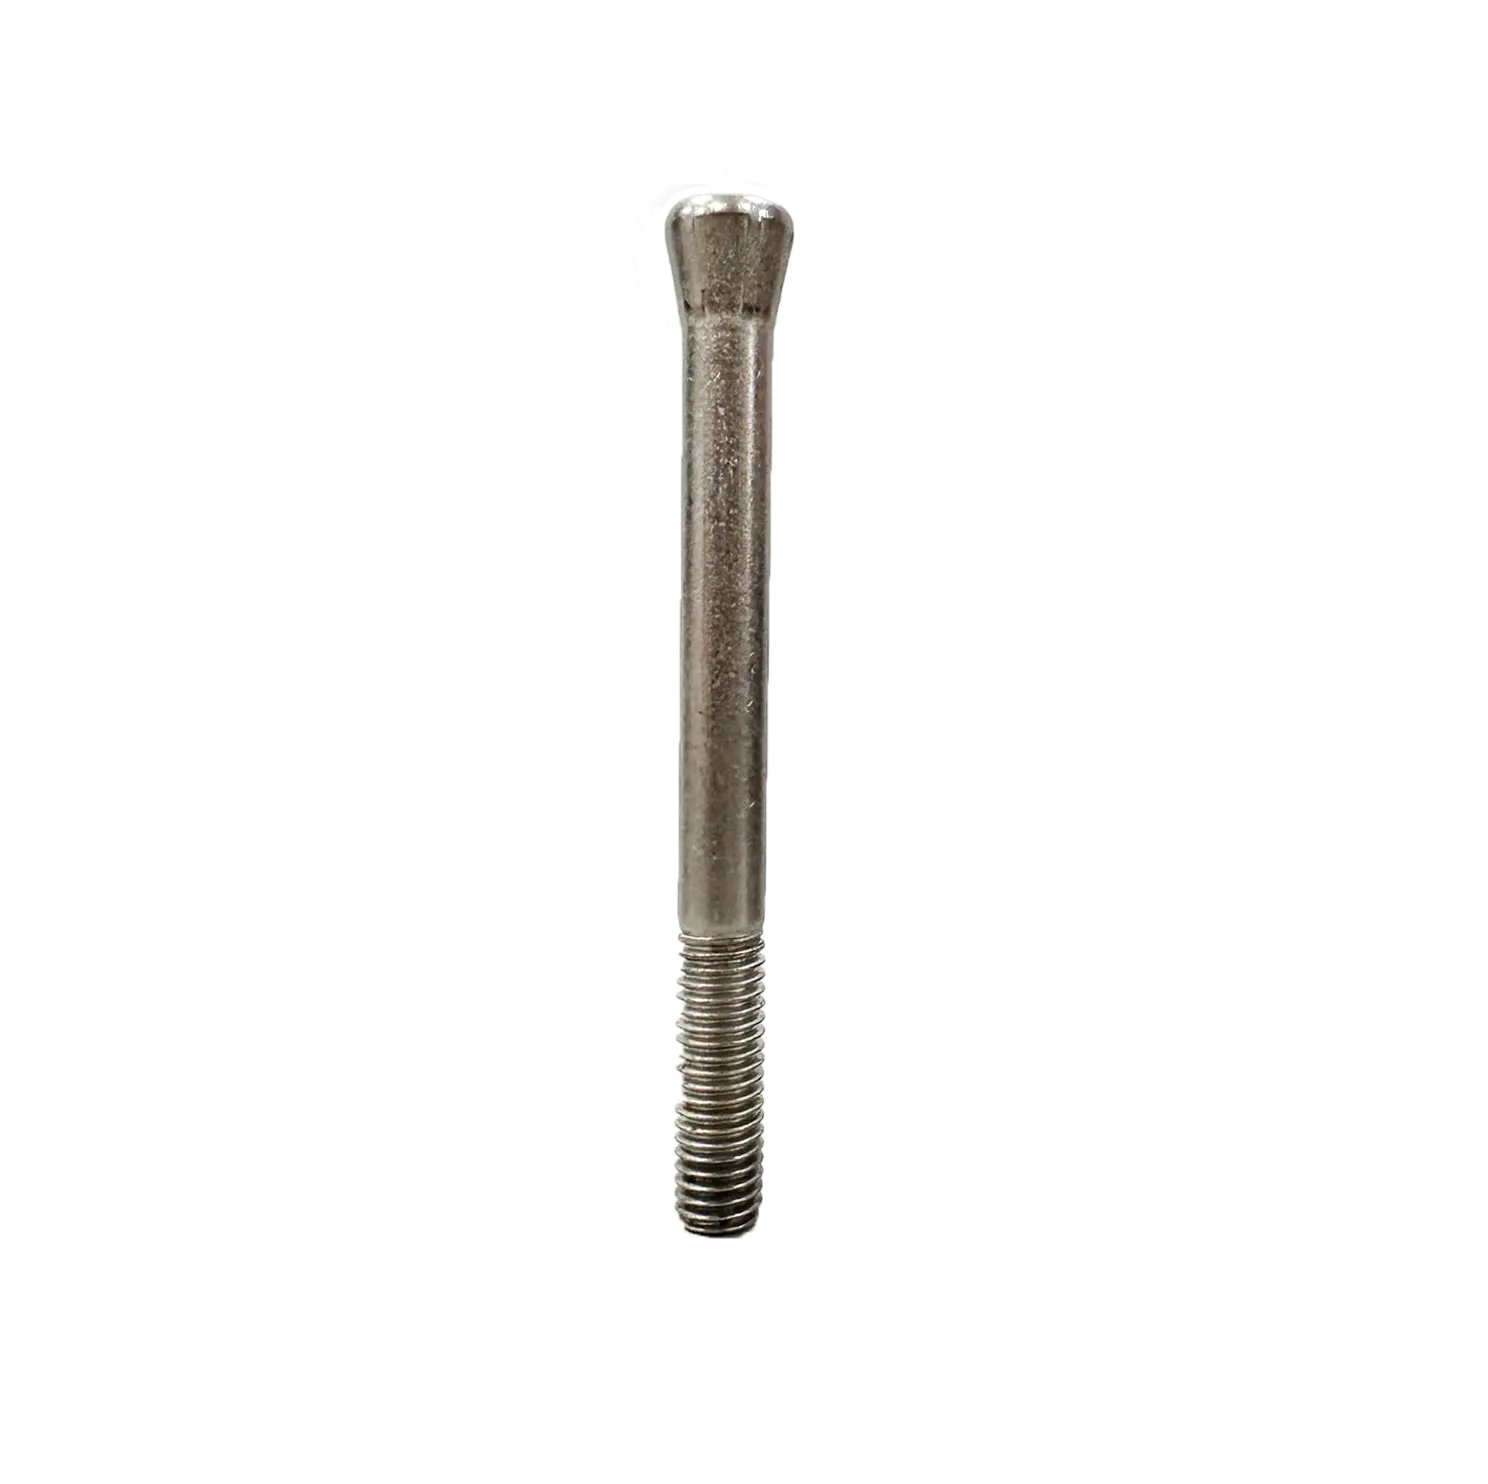 Durable Screw Nut Hex Bolt Telescopic Screw Type Long Screw For Connection Use